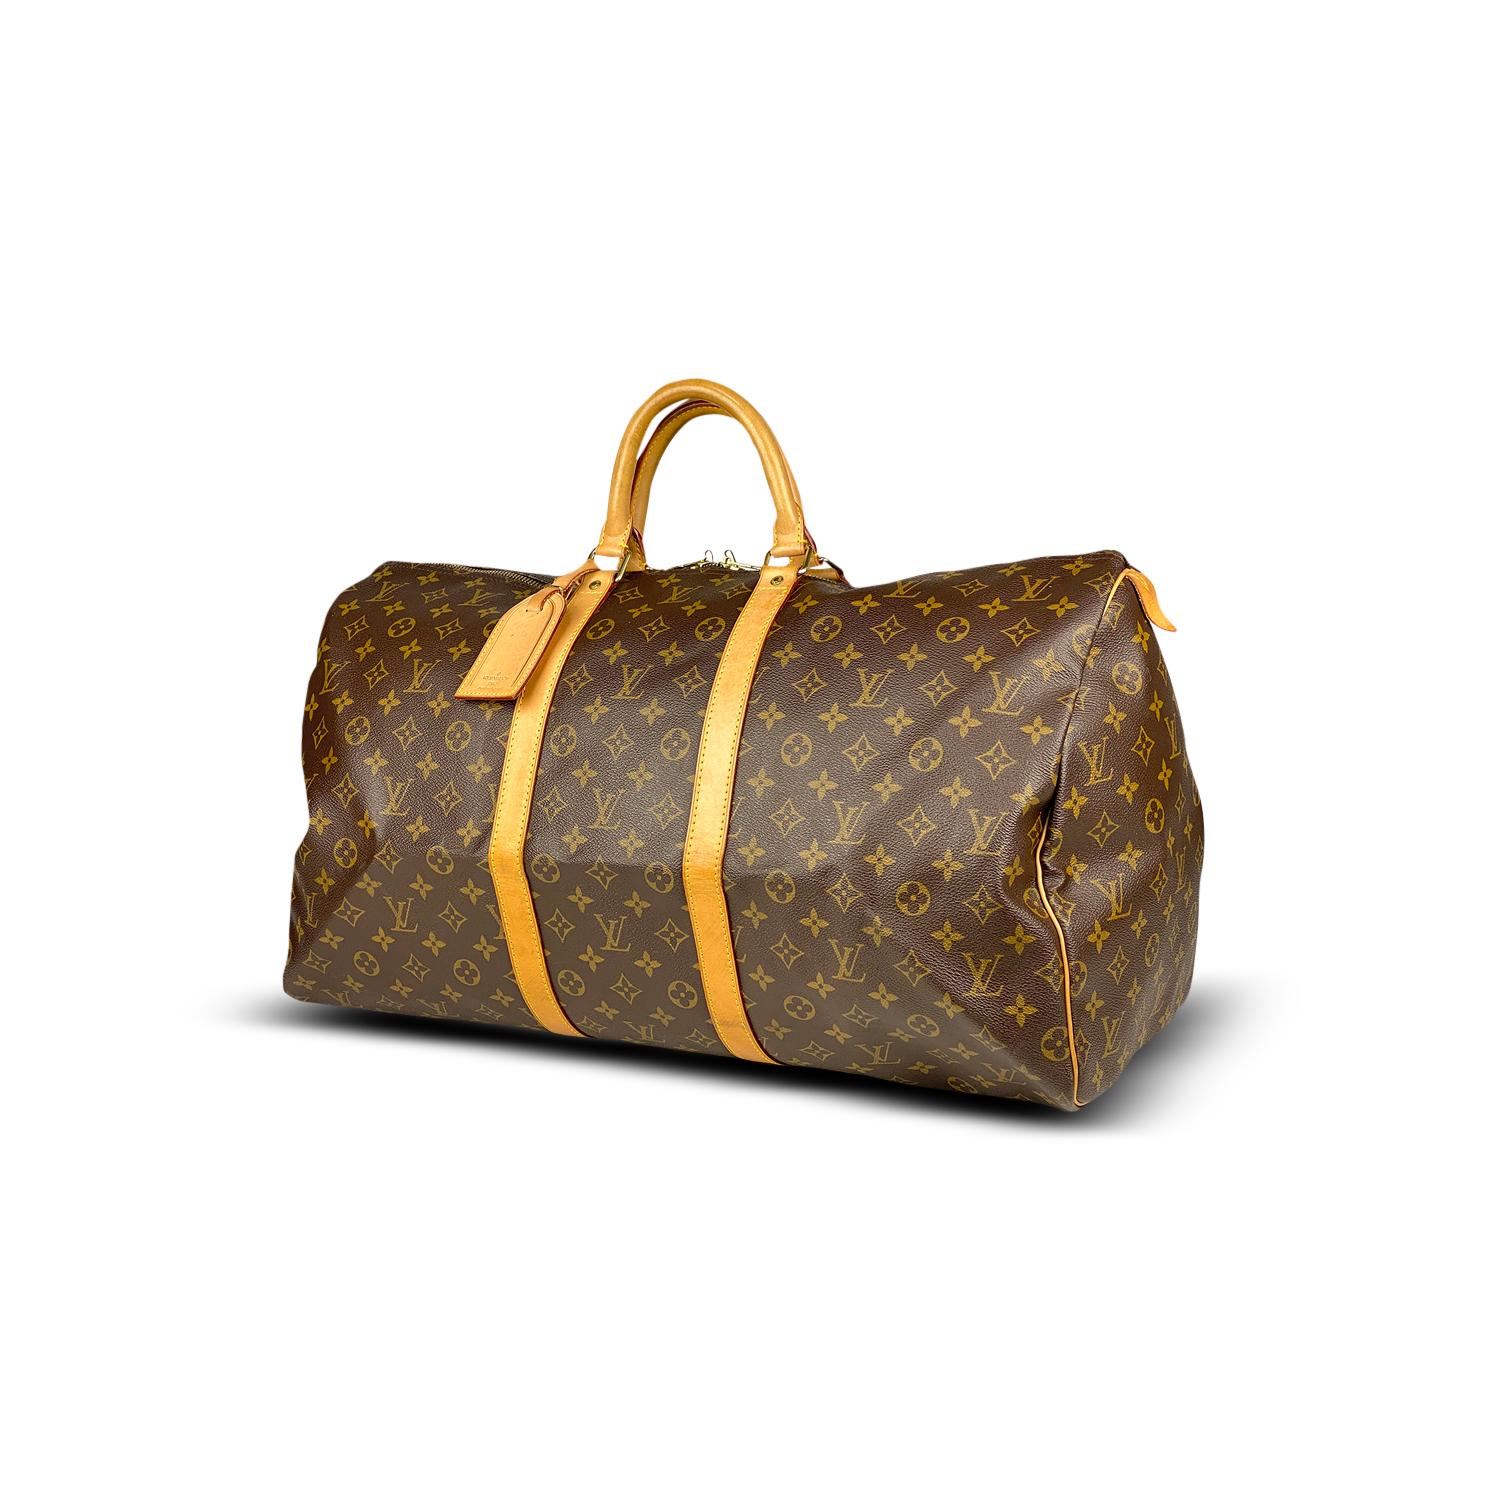 Brown and tan monogram coated canvas Louis Vuitton Keepall 55 with

– Brass hardware
– Tan vachetta leather trim
– Dual rolled top handles
– Tonal canvas lining and two-way zip closure at top

Overall Preloved Condition: Very Good
Exterior